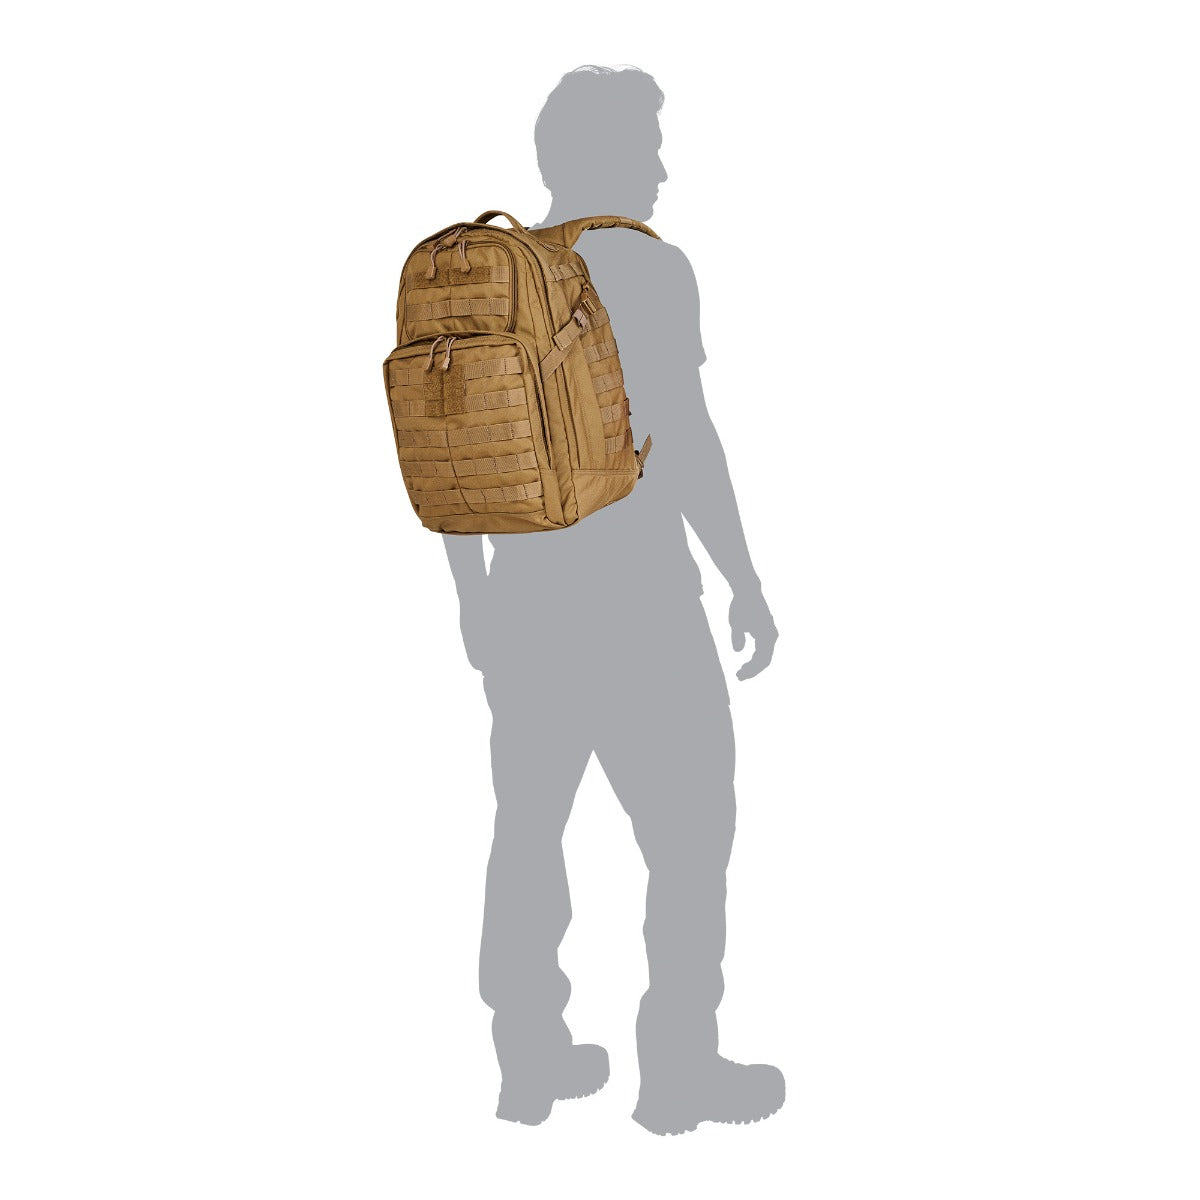 5.11 Tactical Rush24 2.0 Backpack 37L